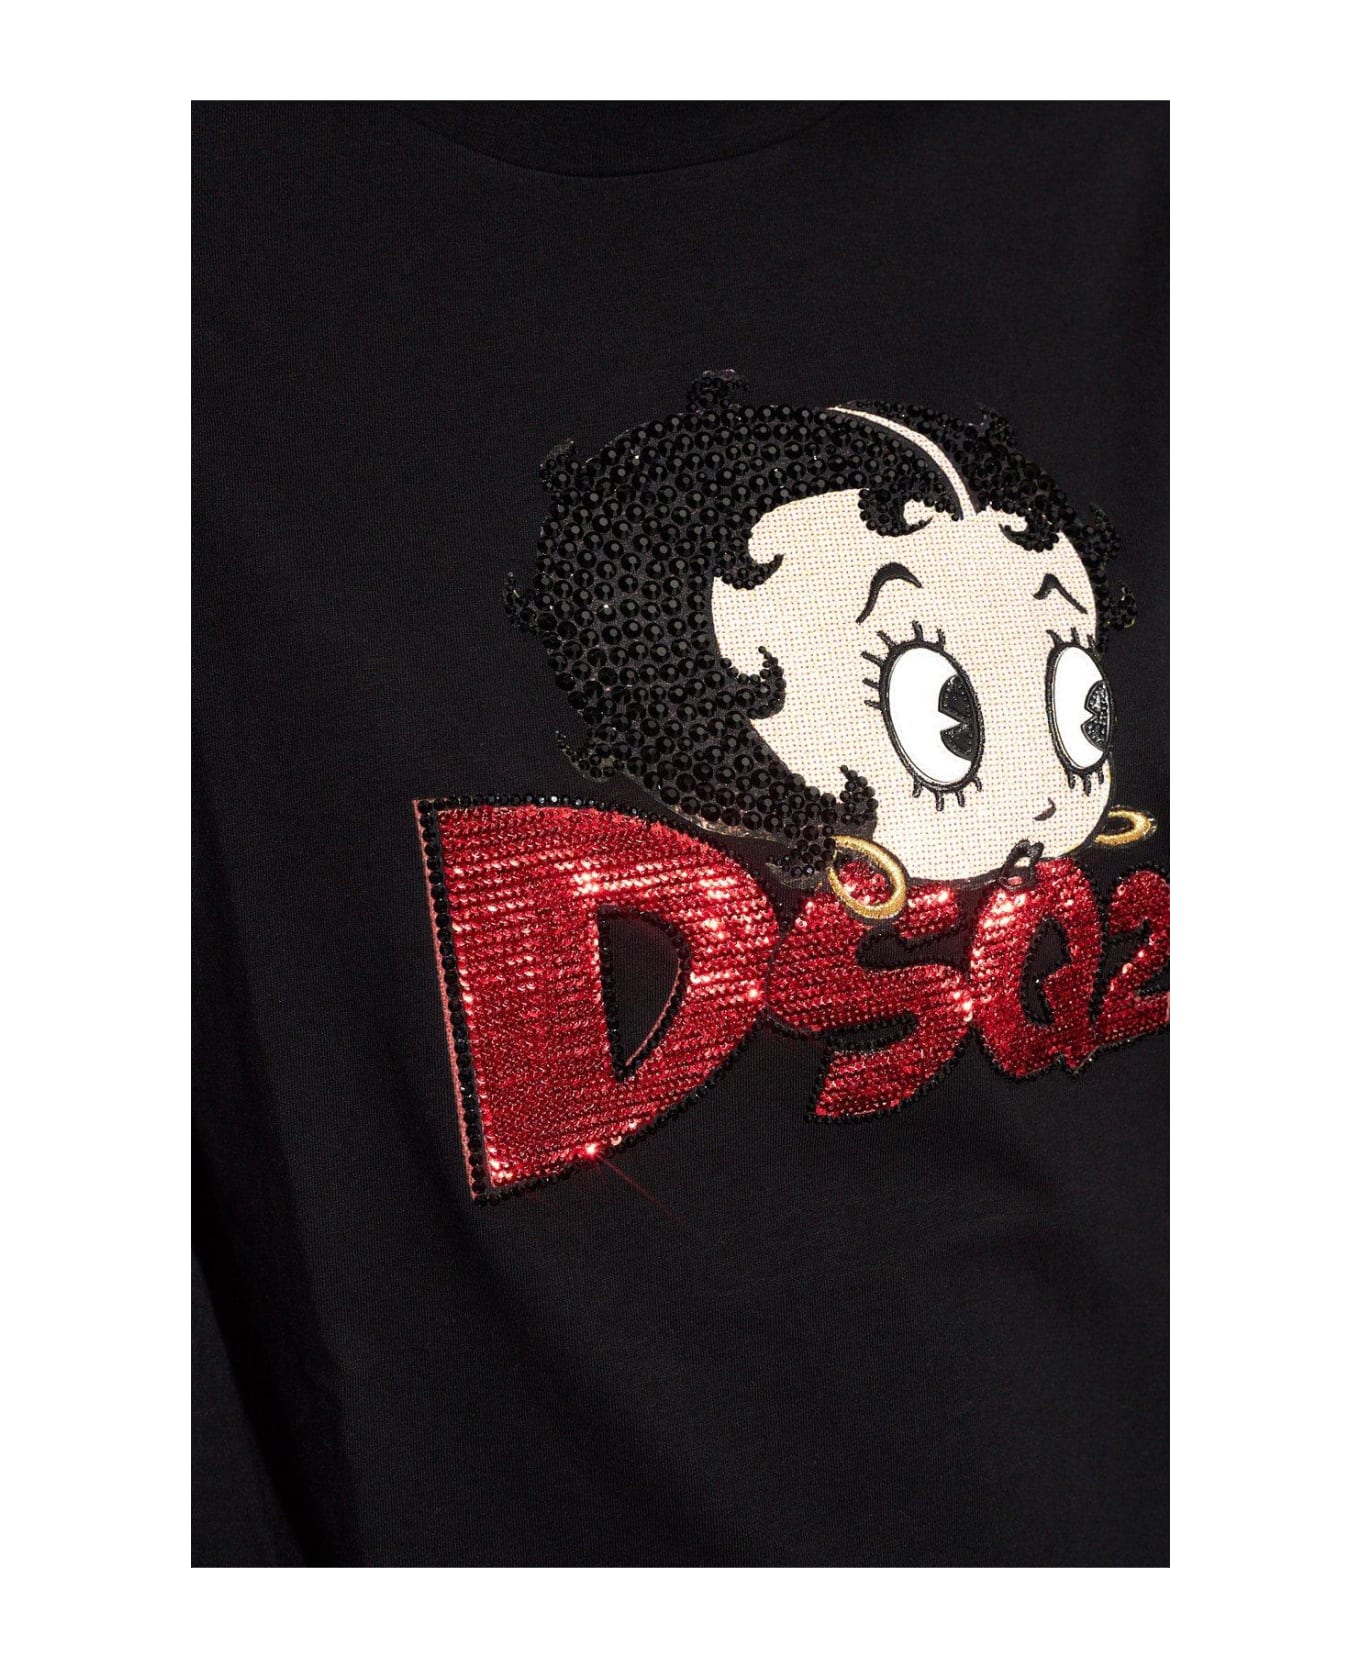 Dsquared2 Betty Boop Sequin Embellished T-shirt - Black